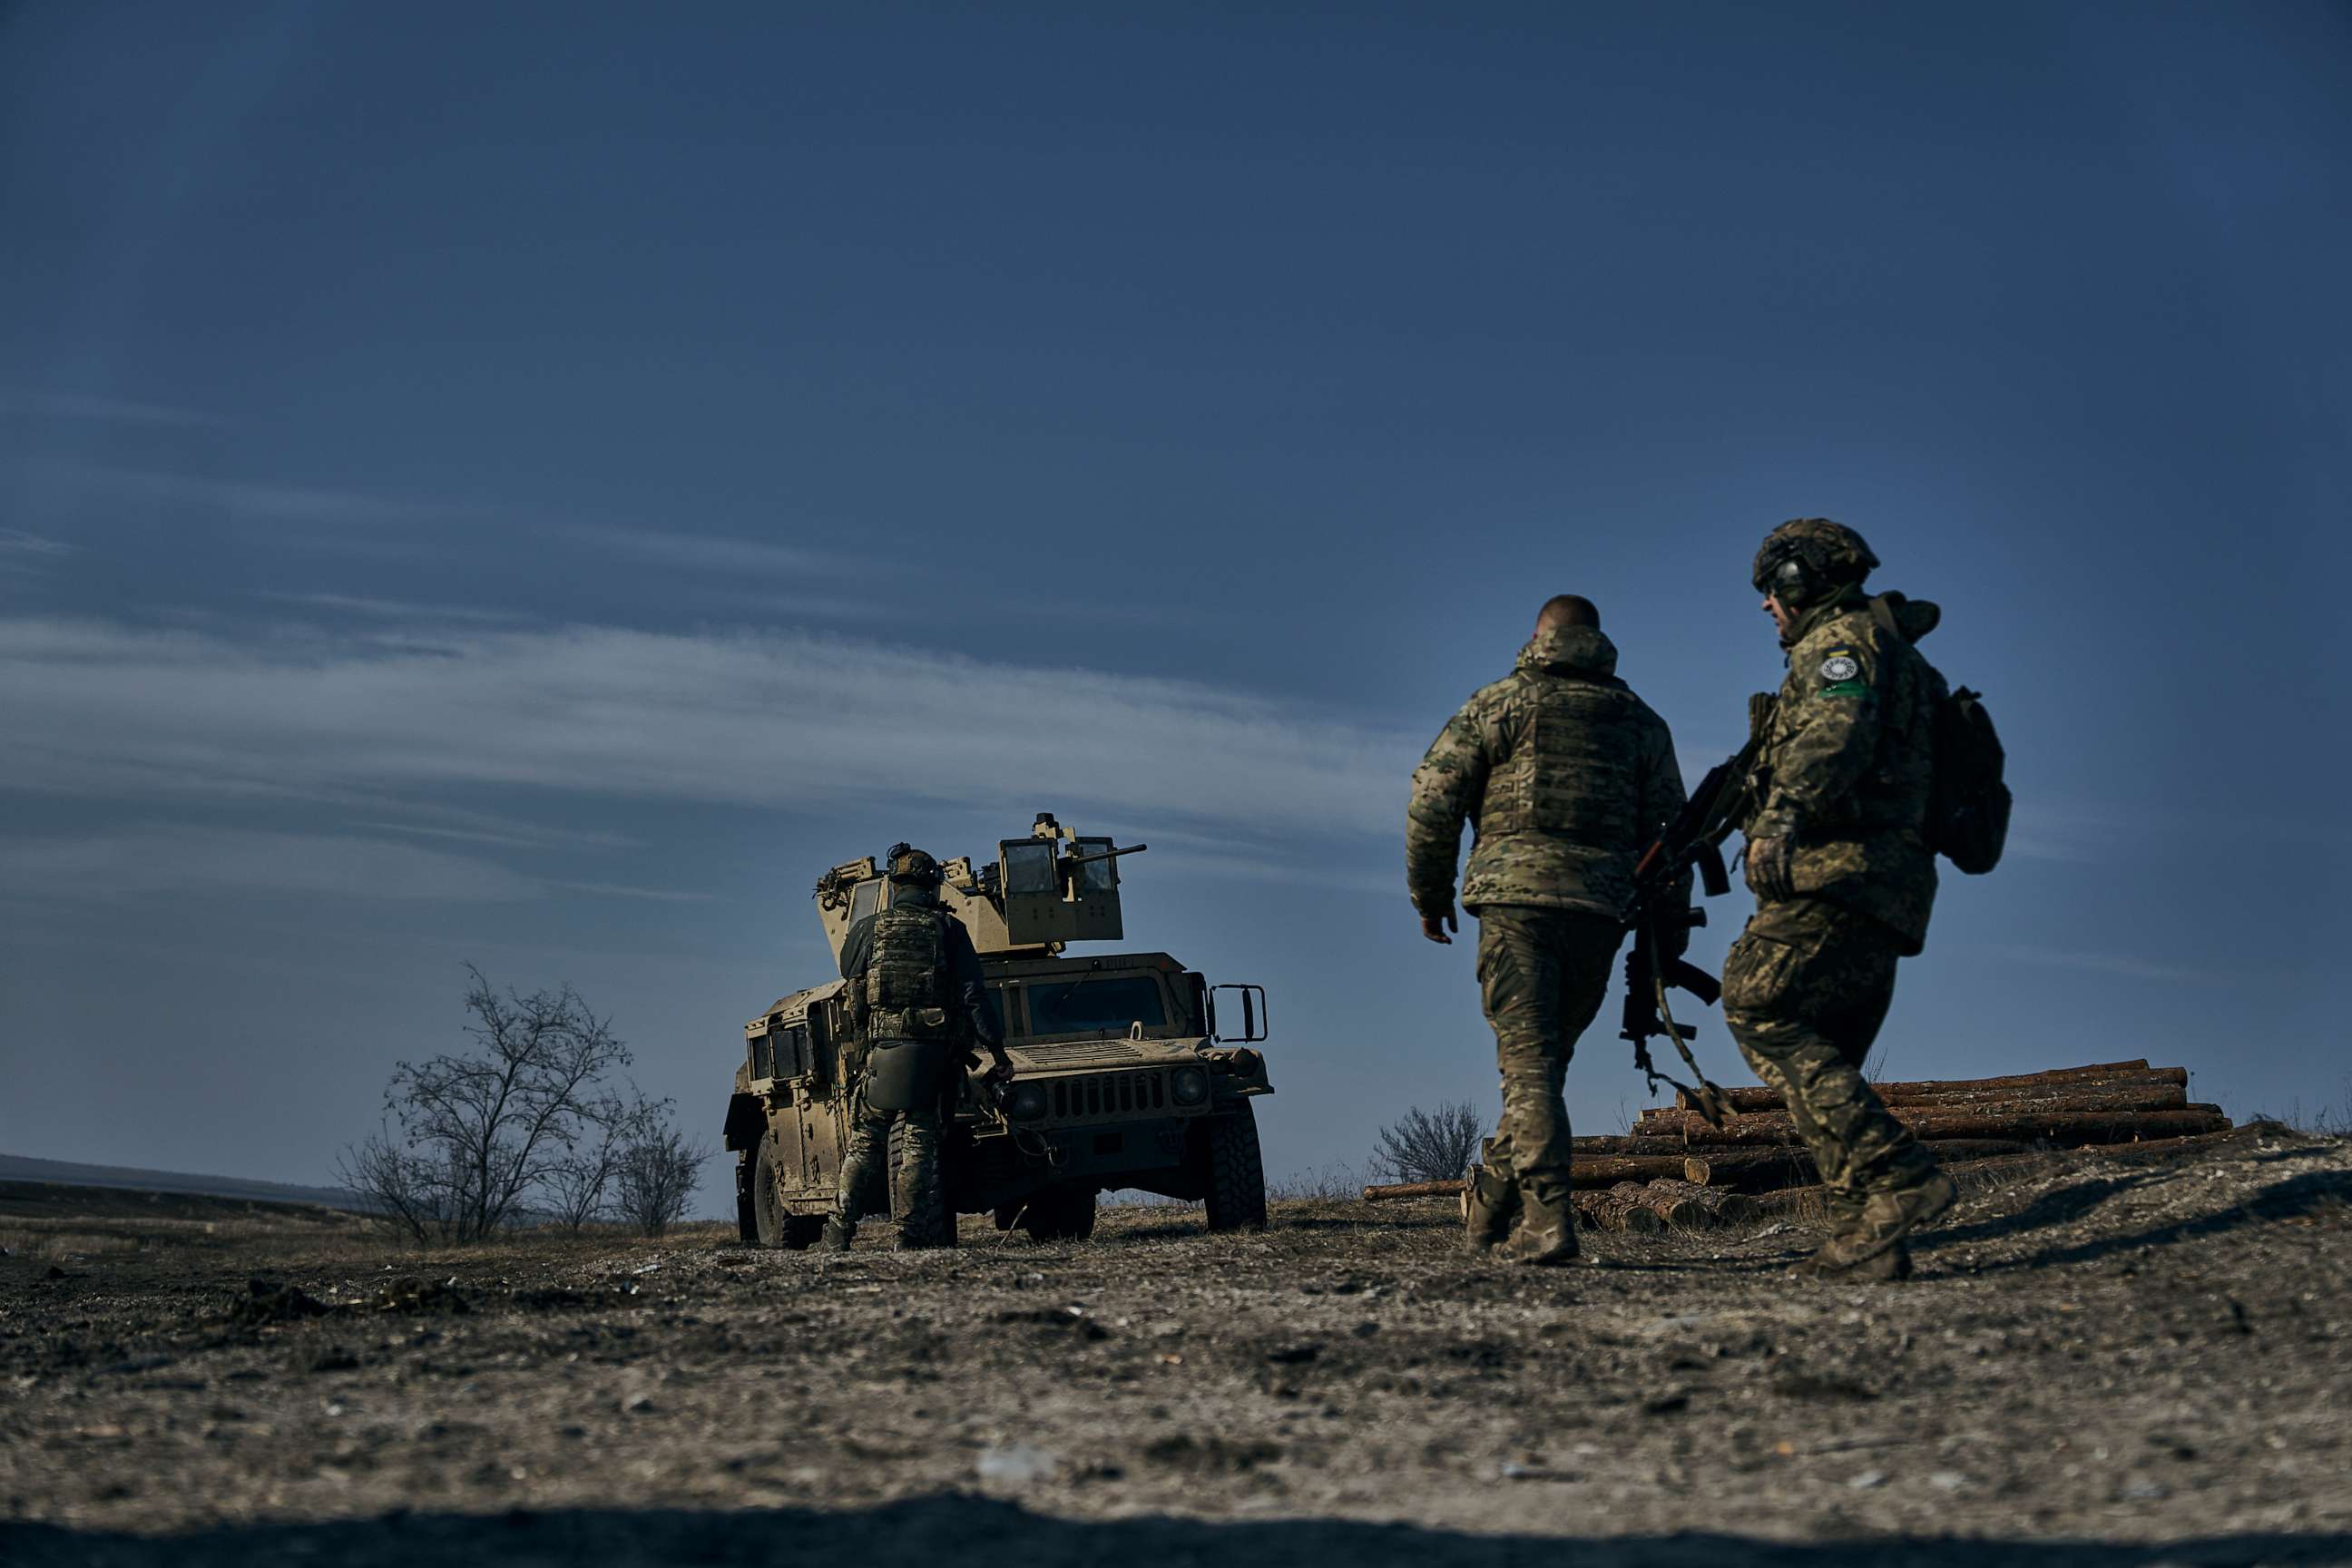 PHOTO: Soldiers of the Ukrainian 3rd Army Assault Brigade of the Special Operations Forces (SSO) "Azov" approach their armoured U.S. Hummer vehicle in position near Bakhmut, Donetsk region, Ukraine, Saturday, Feb. 11, 2023.